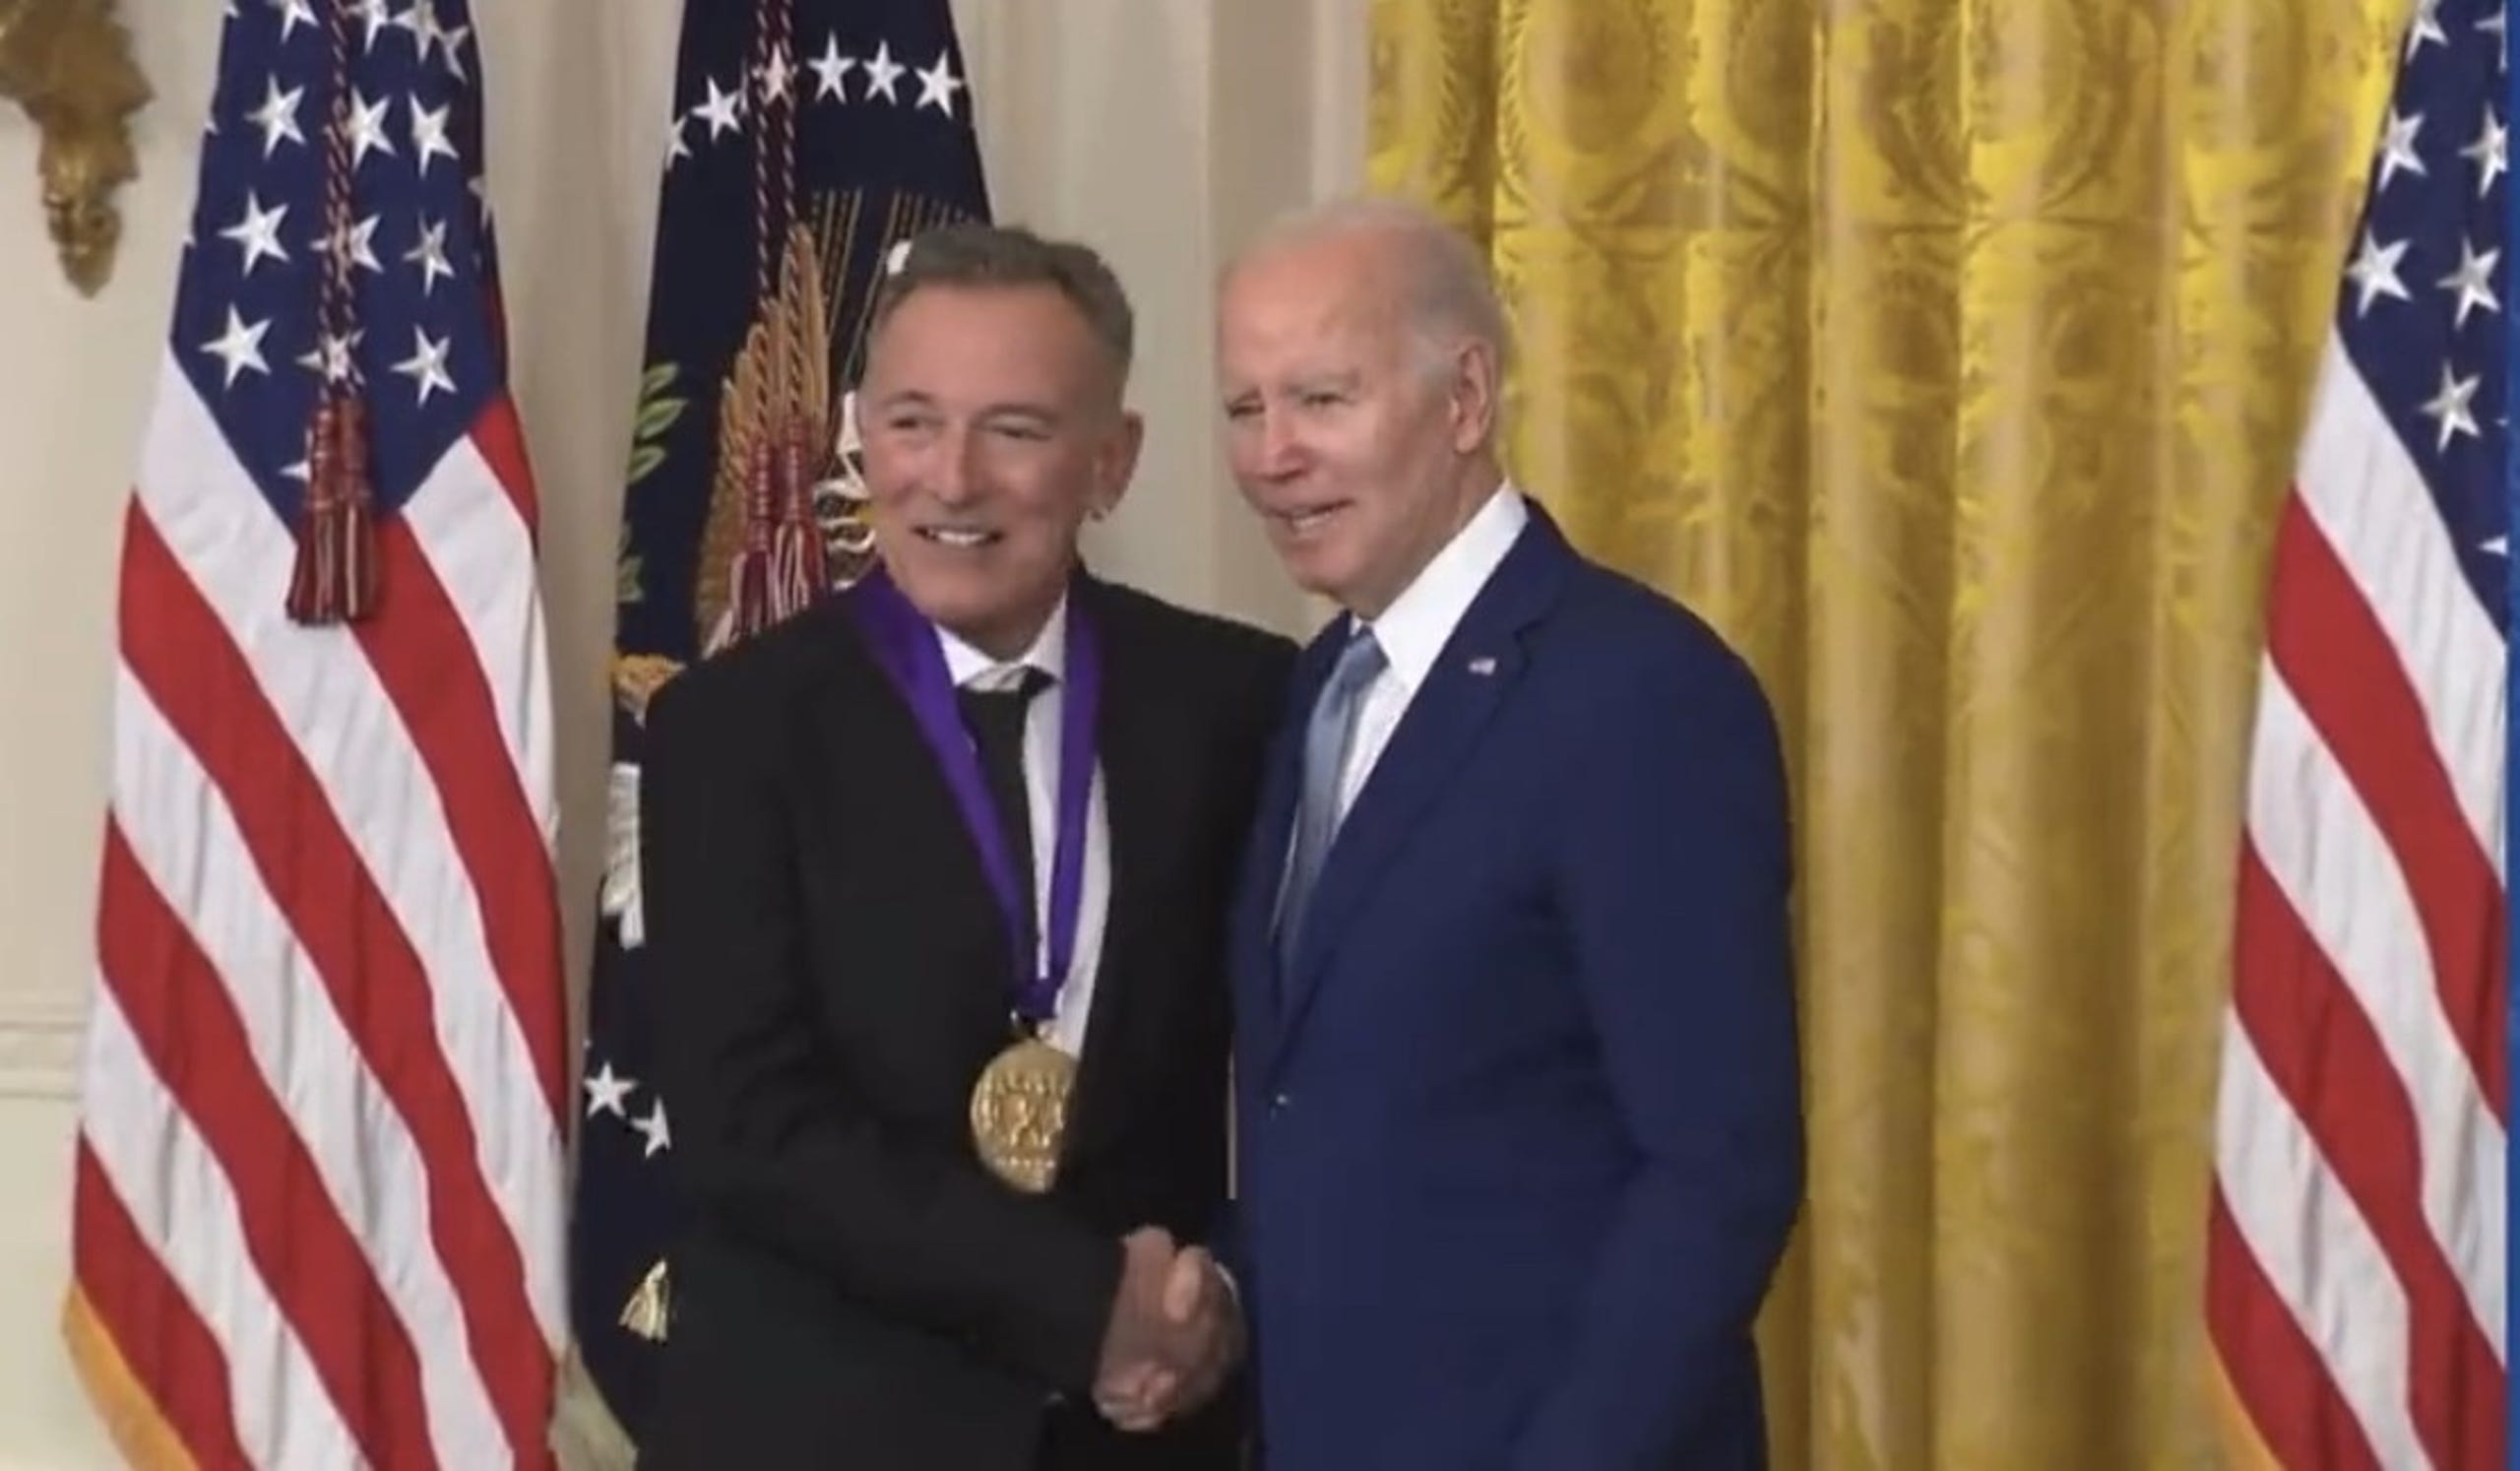 Bruce Springsteen and President Joe Biden at the Tuesday, March 21, 2023 National Medal of Arts and National Humanities Medal ceremony in the East Room of the White House.